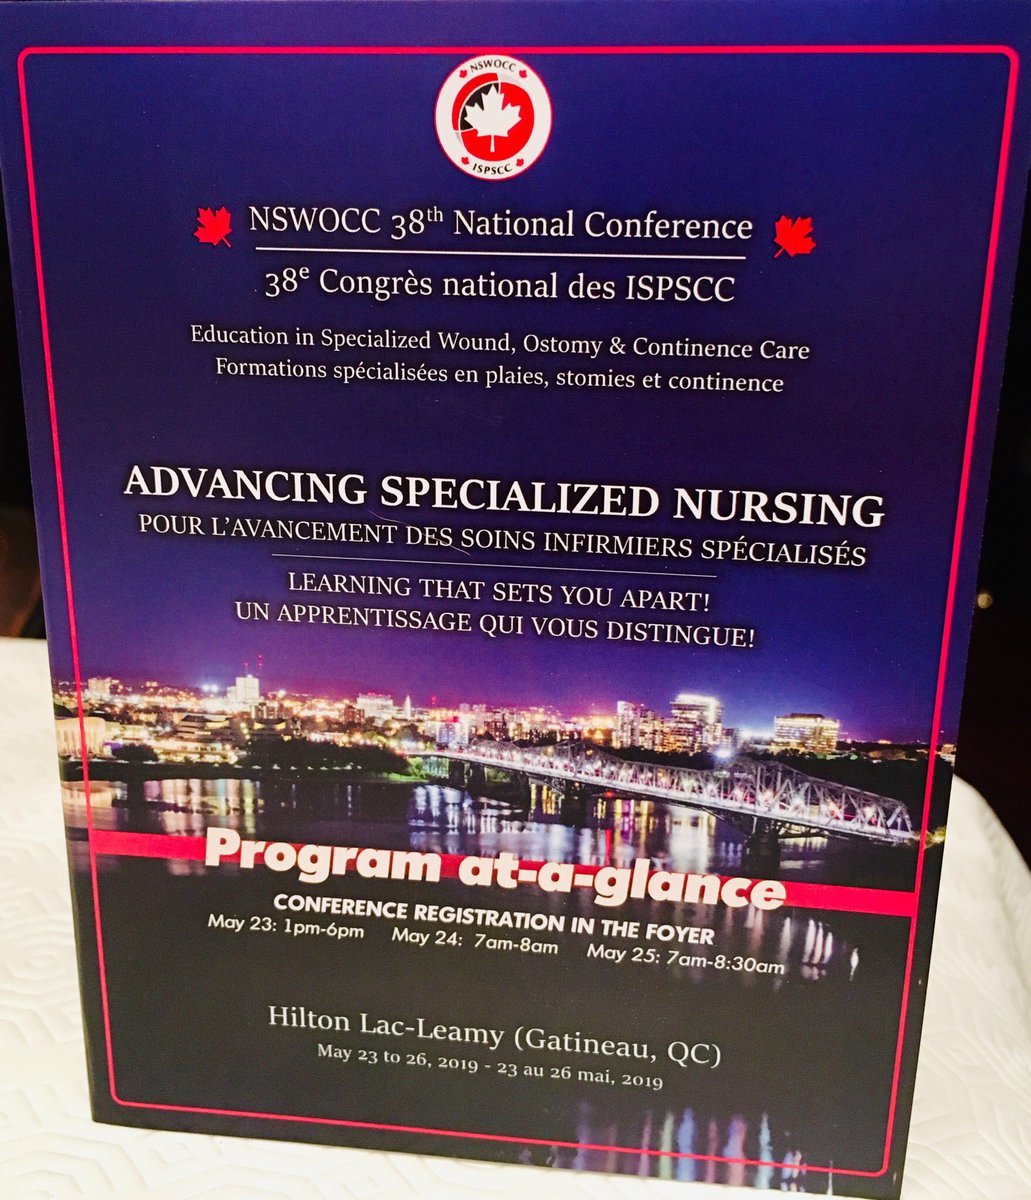 Getting ready for the 38th NSWOCC National Conference! Looking forward to the educational program and networking with Canadian colleagues! @CatherineHarley @CAETAcademy17 @NSWOC @cdncontinence @OstomyCanada  #wound #Ostomy #Continence